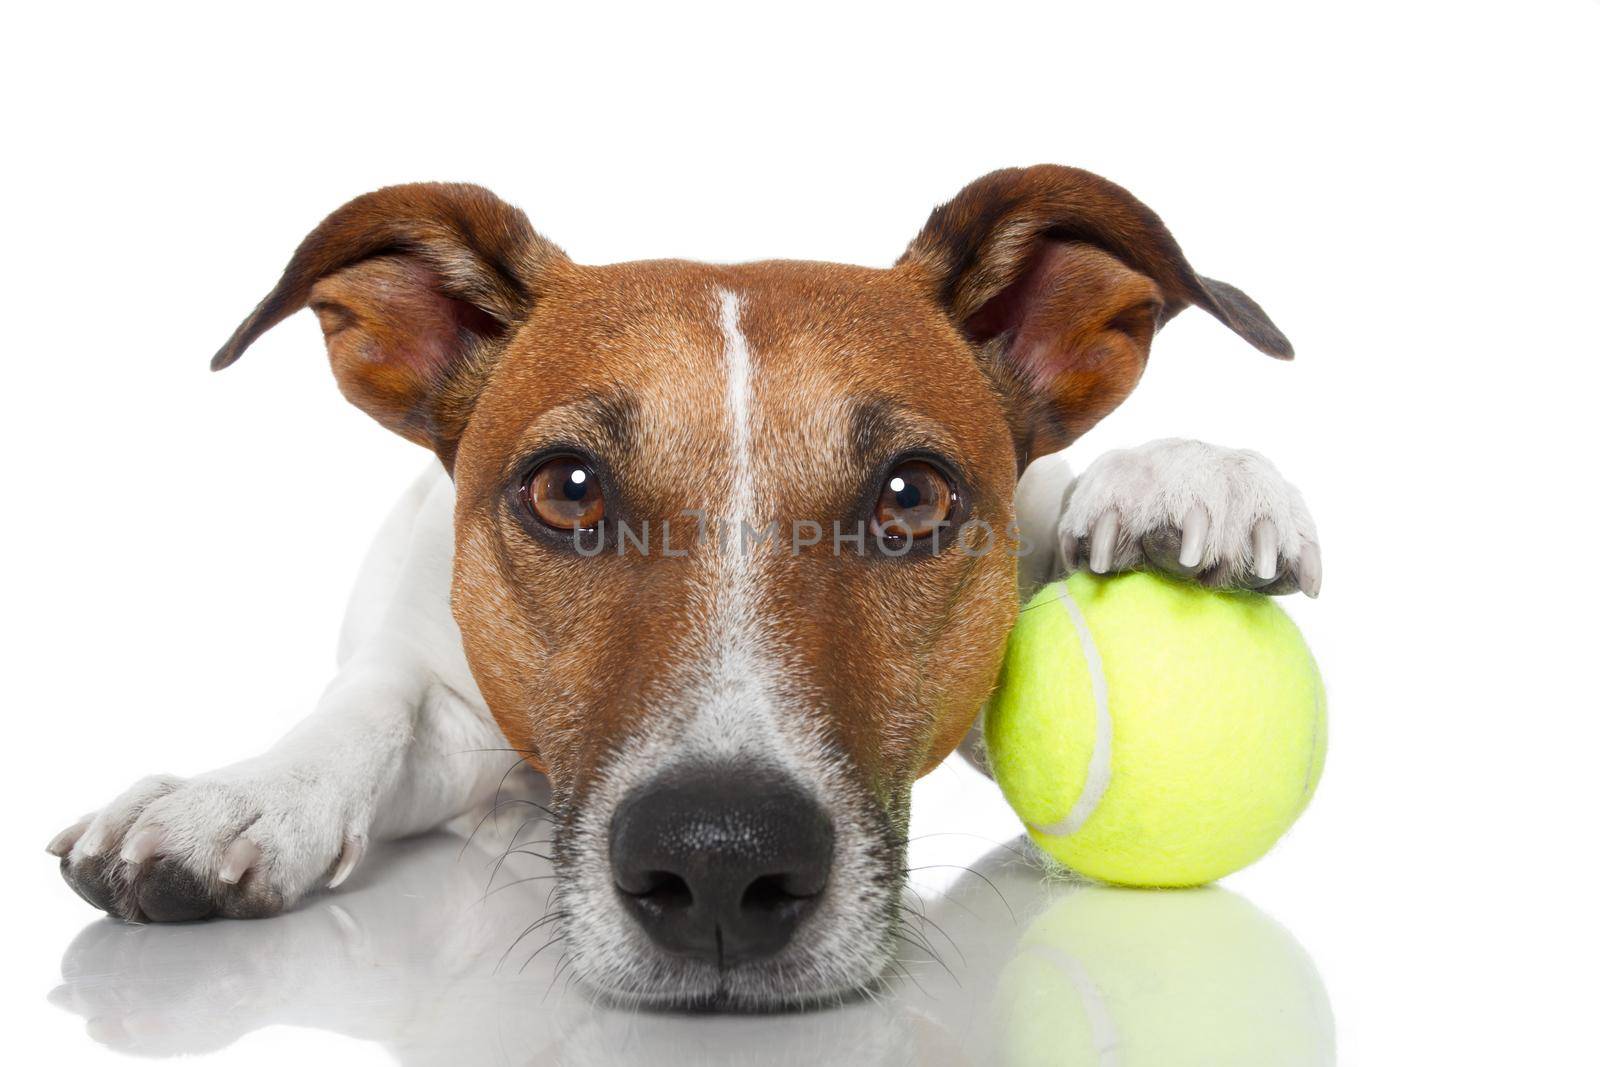 dog with tennis ball by Brosch